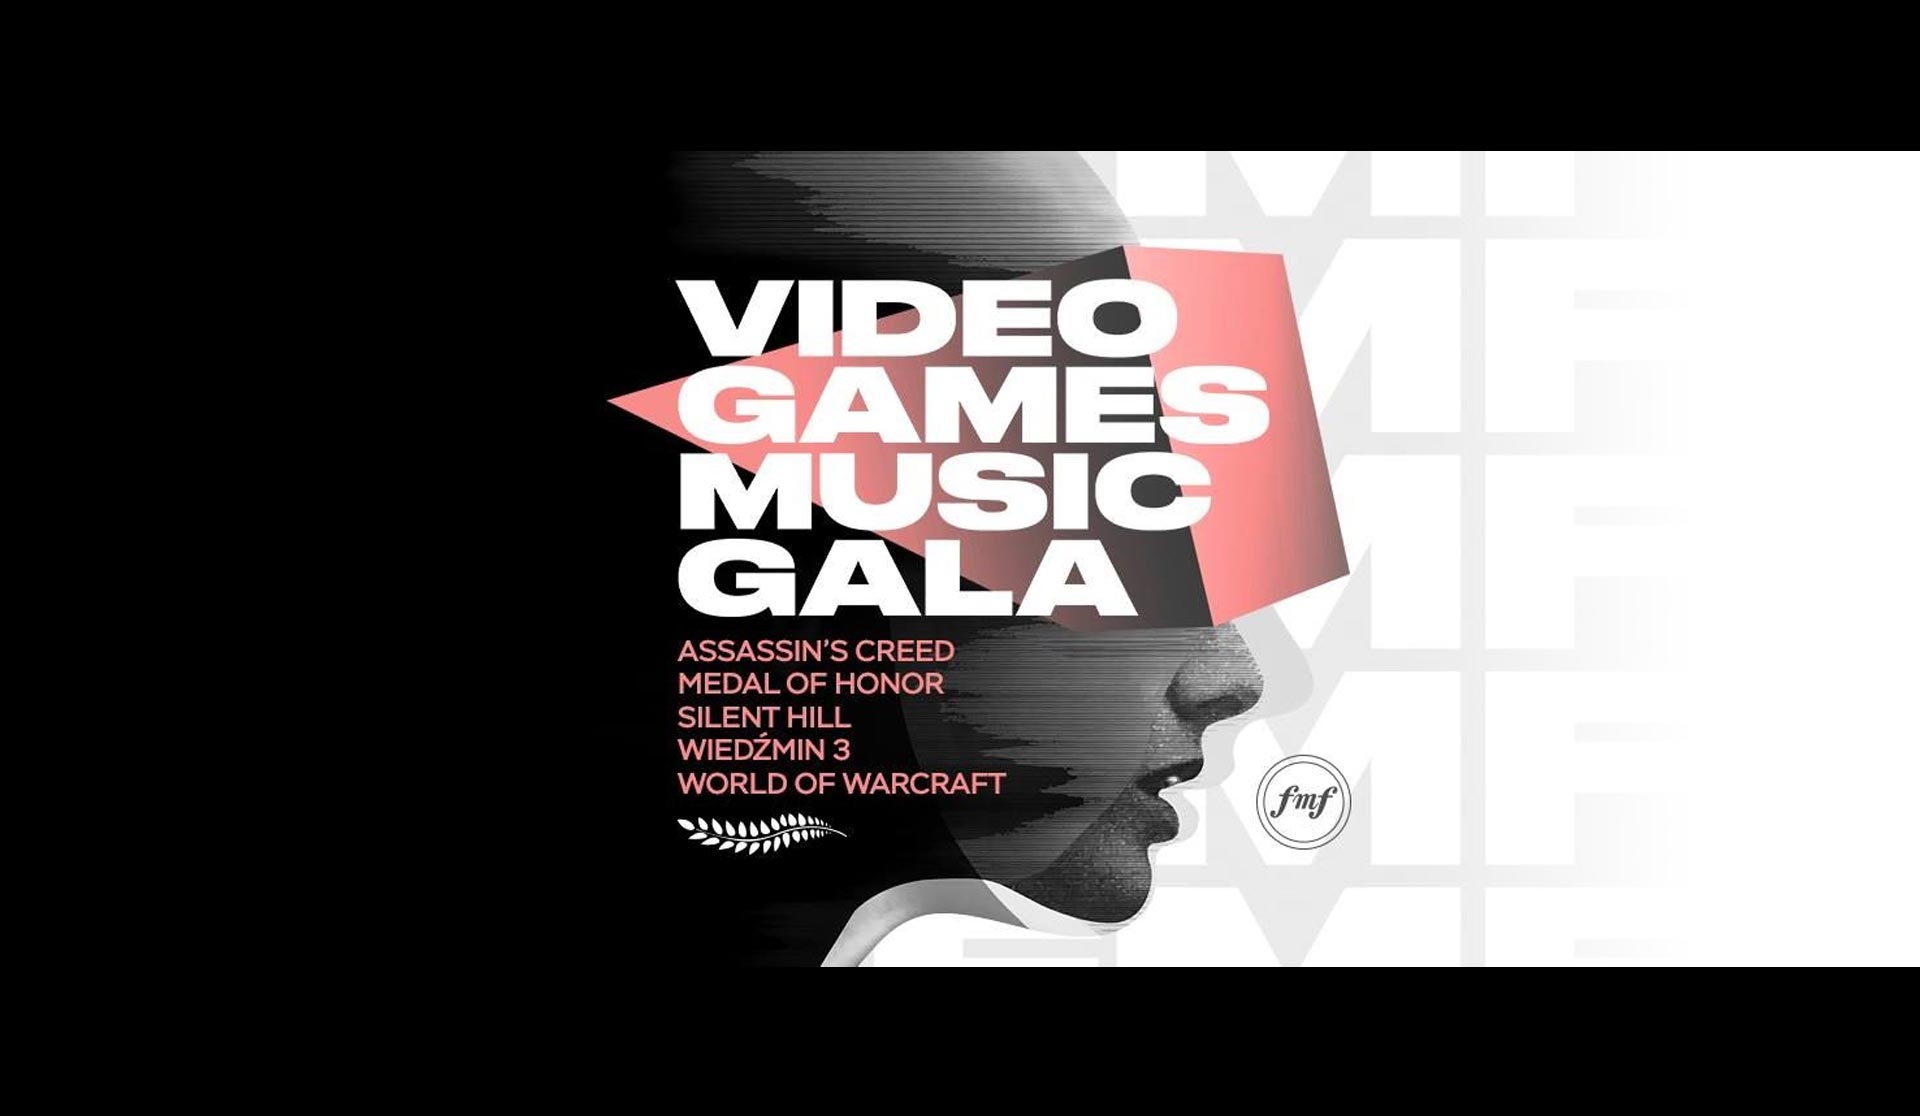 02.06.2018 – Video Games Music Gala (FMF), Cracow